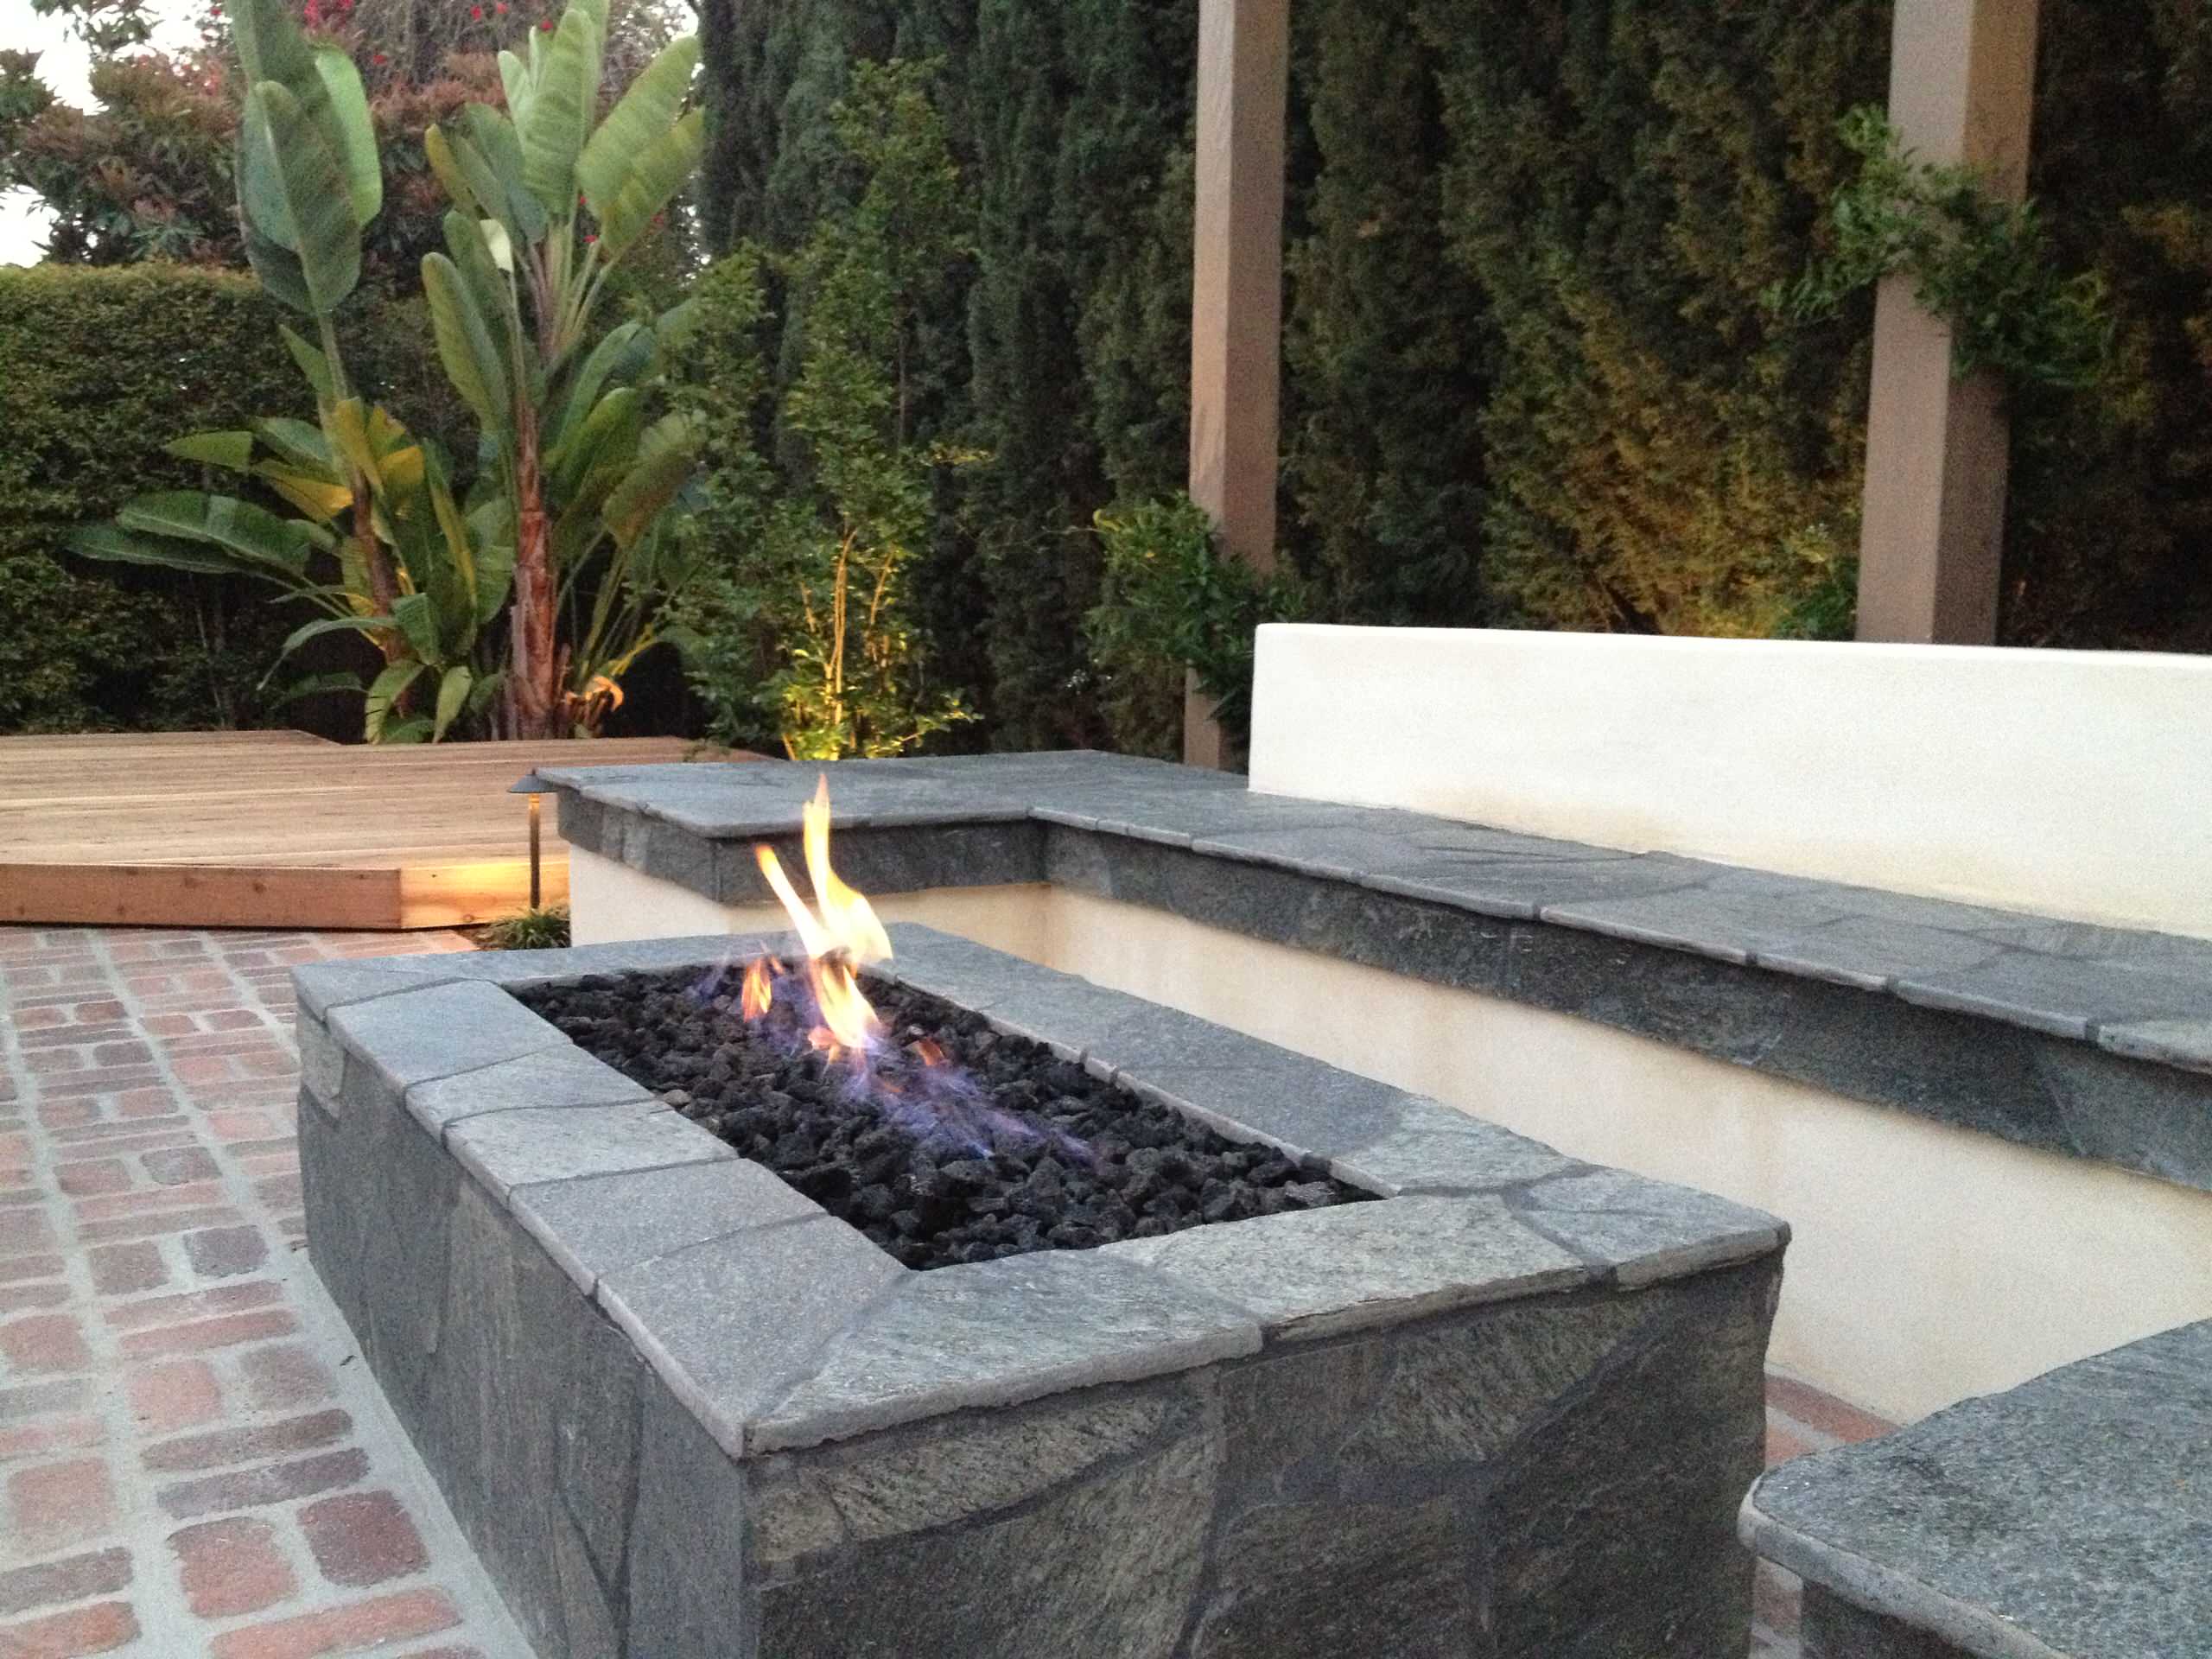 Kensington Outdoor Fire Pit Seating Lounge